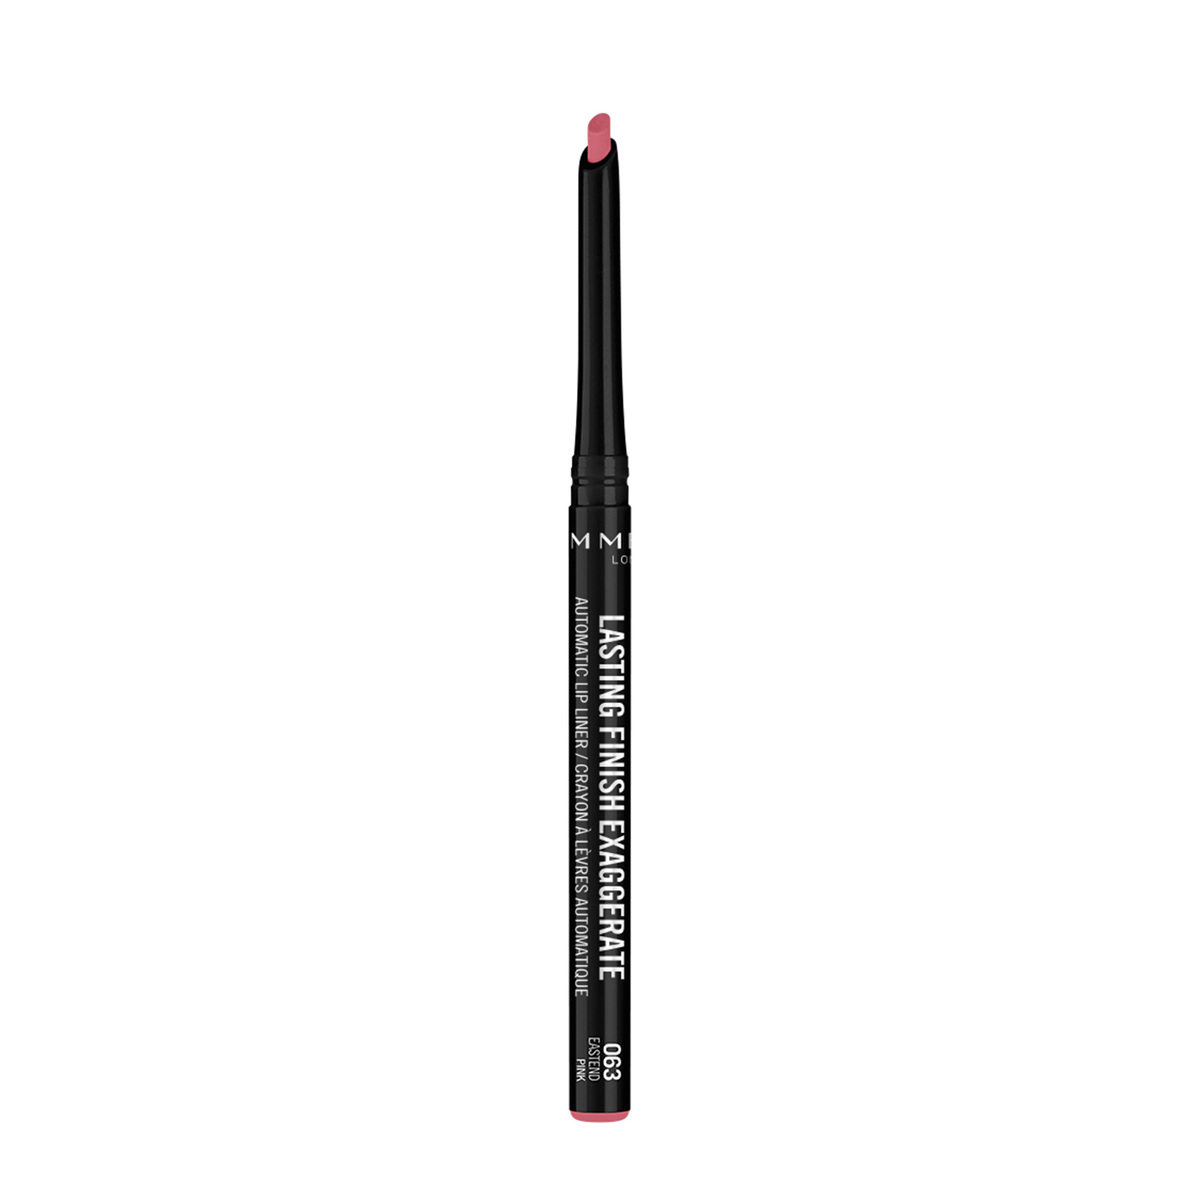 Rimmel London Lasting Finish Exaggerate Automatic Lip Liner, Shade 63 Eastend Pink, 0.25 g - 0.008 fl oz